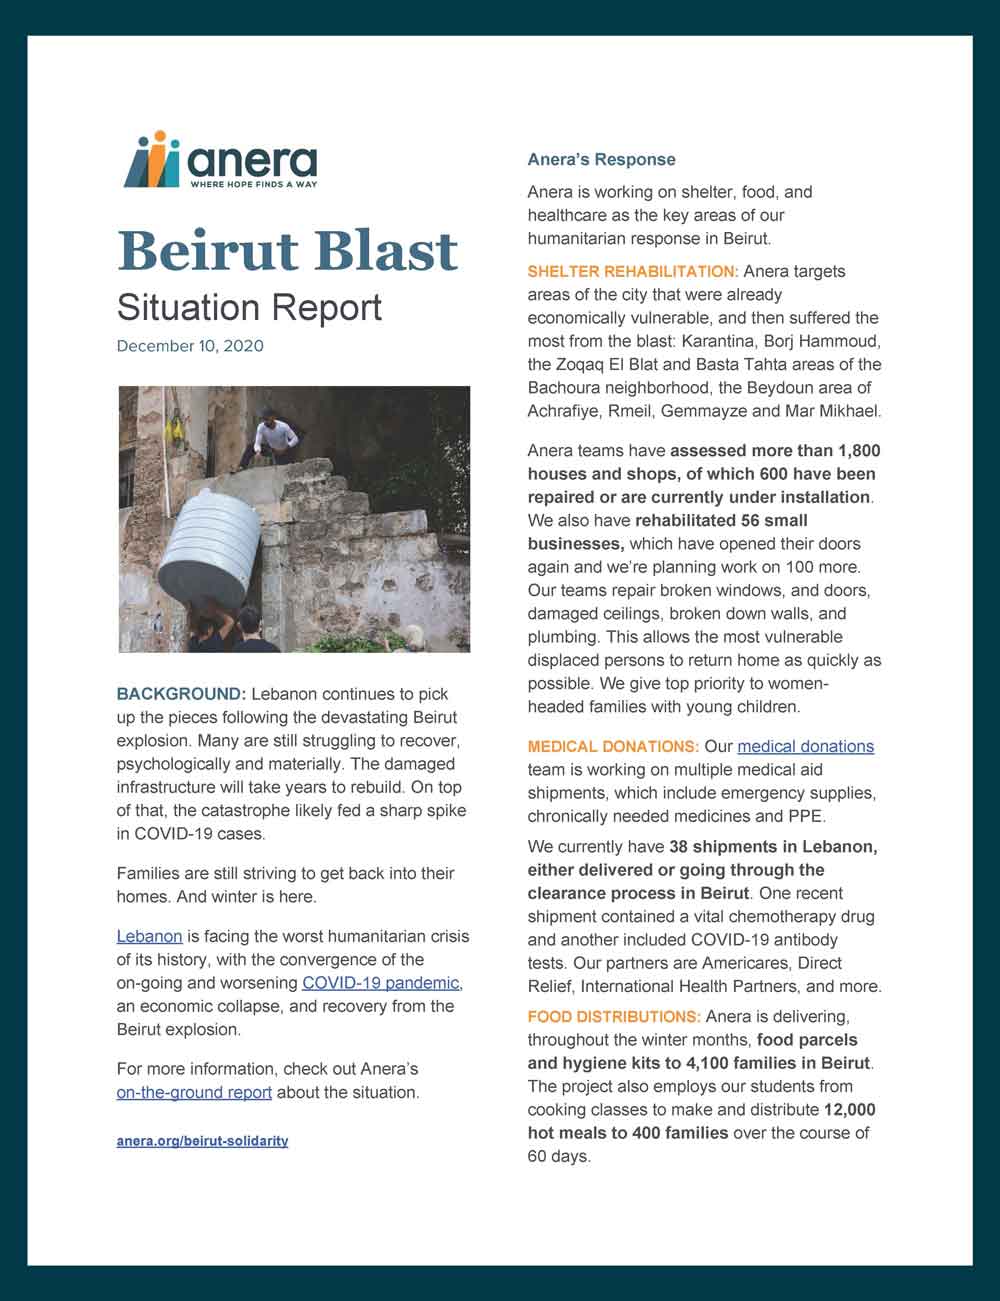 Anera's Beirut Response Situation Report for December 10, 2020